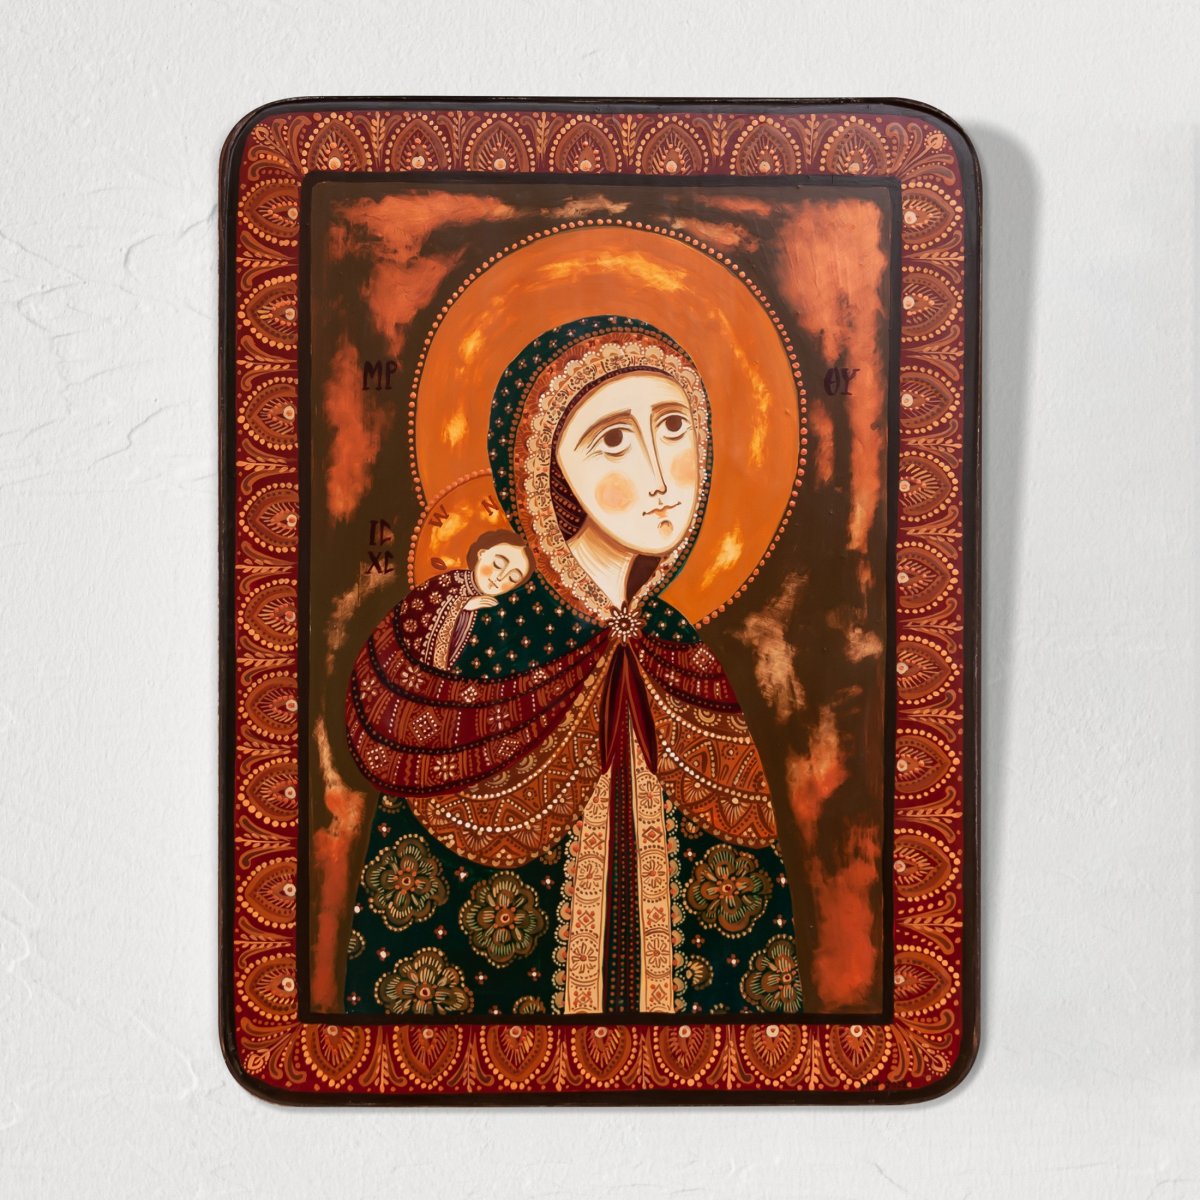 Wood icon, "Andes Virgin & Child", Hand painted